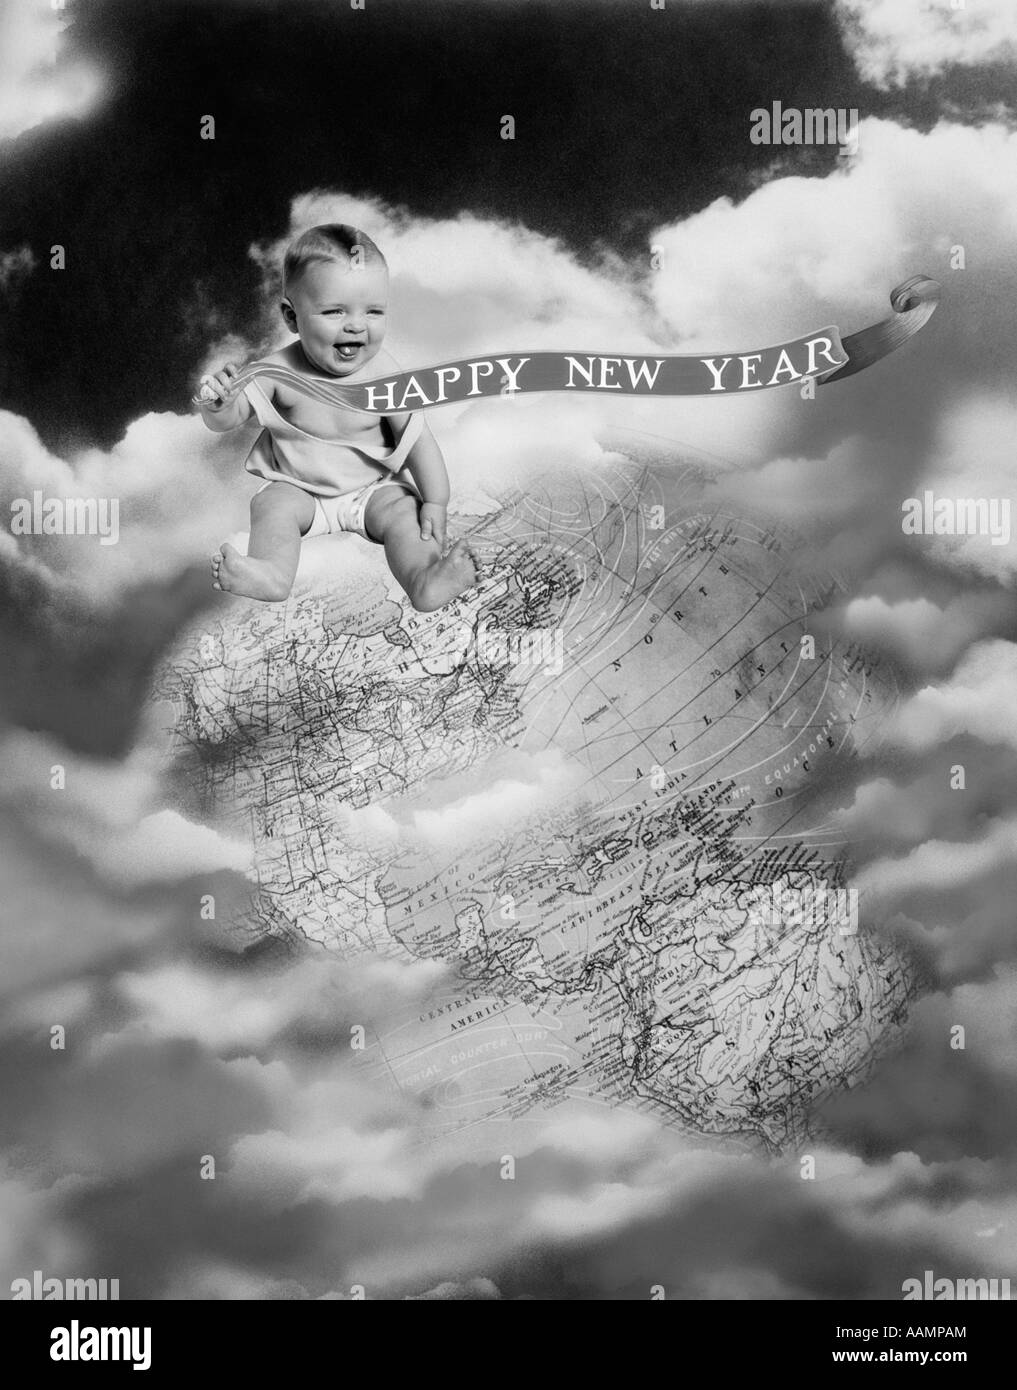 1930s MONTAGE BABY SITTING ON TOP OF THE WORLD EARTH GLOBE IN CLOUDS HOLDING HAPPY NEW YEAR BANNER Stock Photo